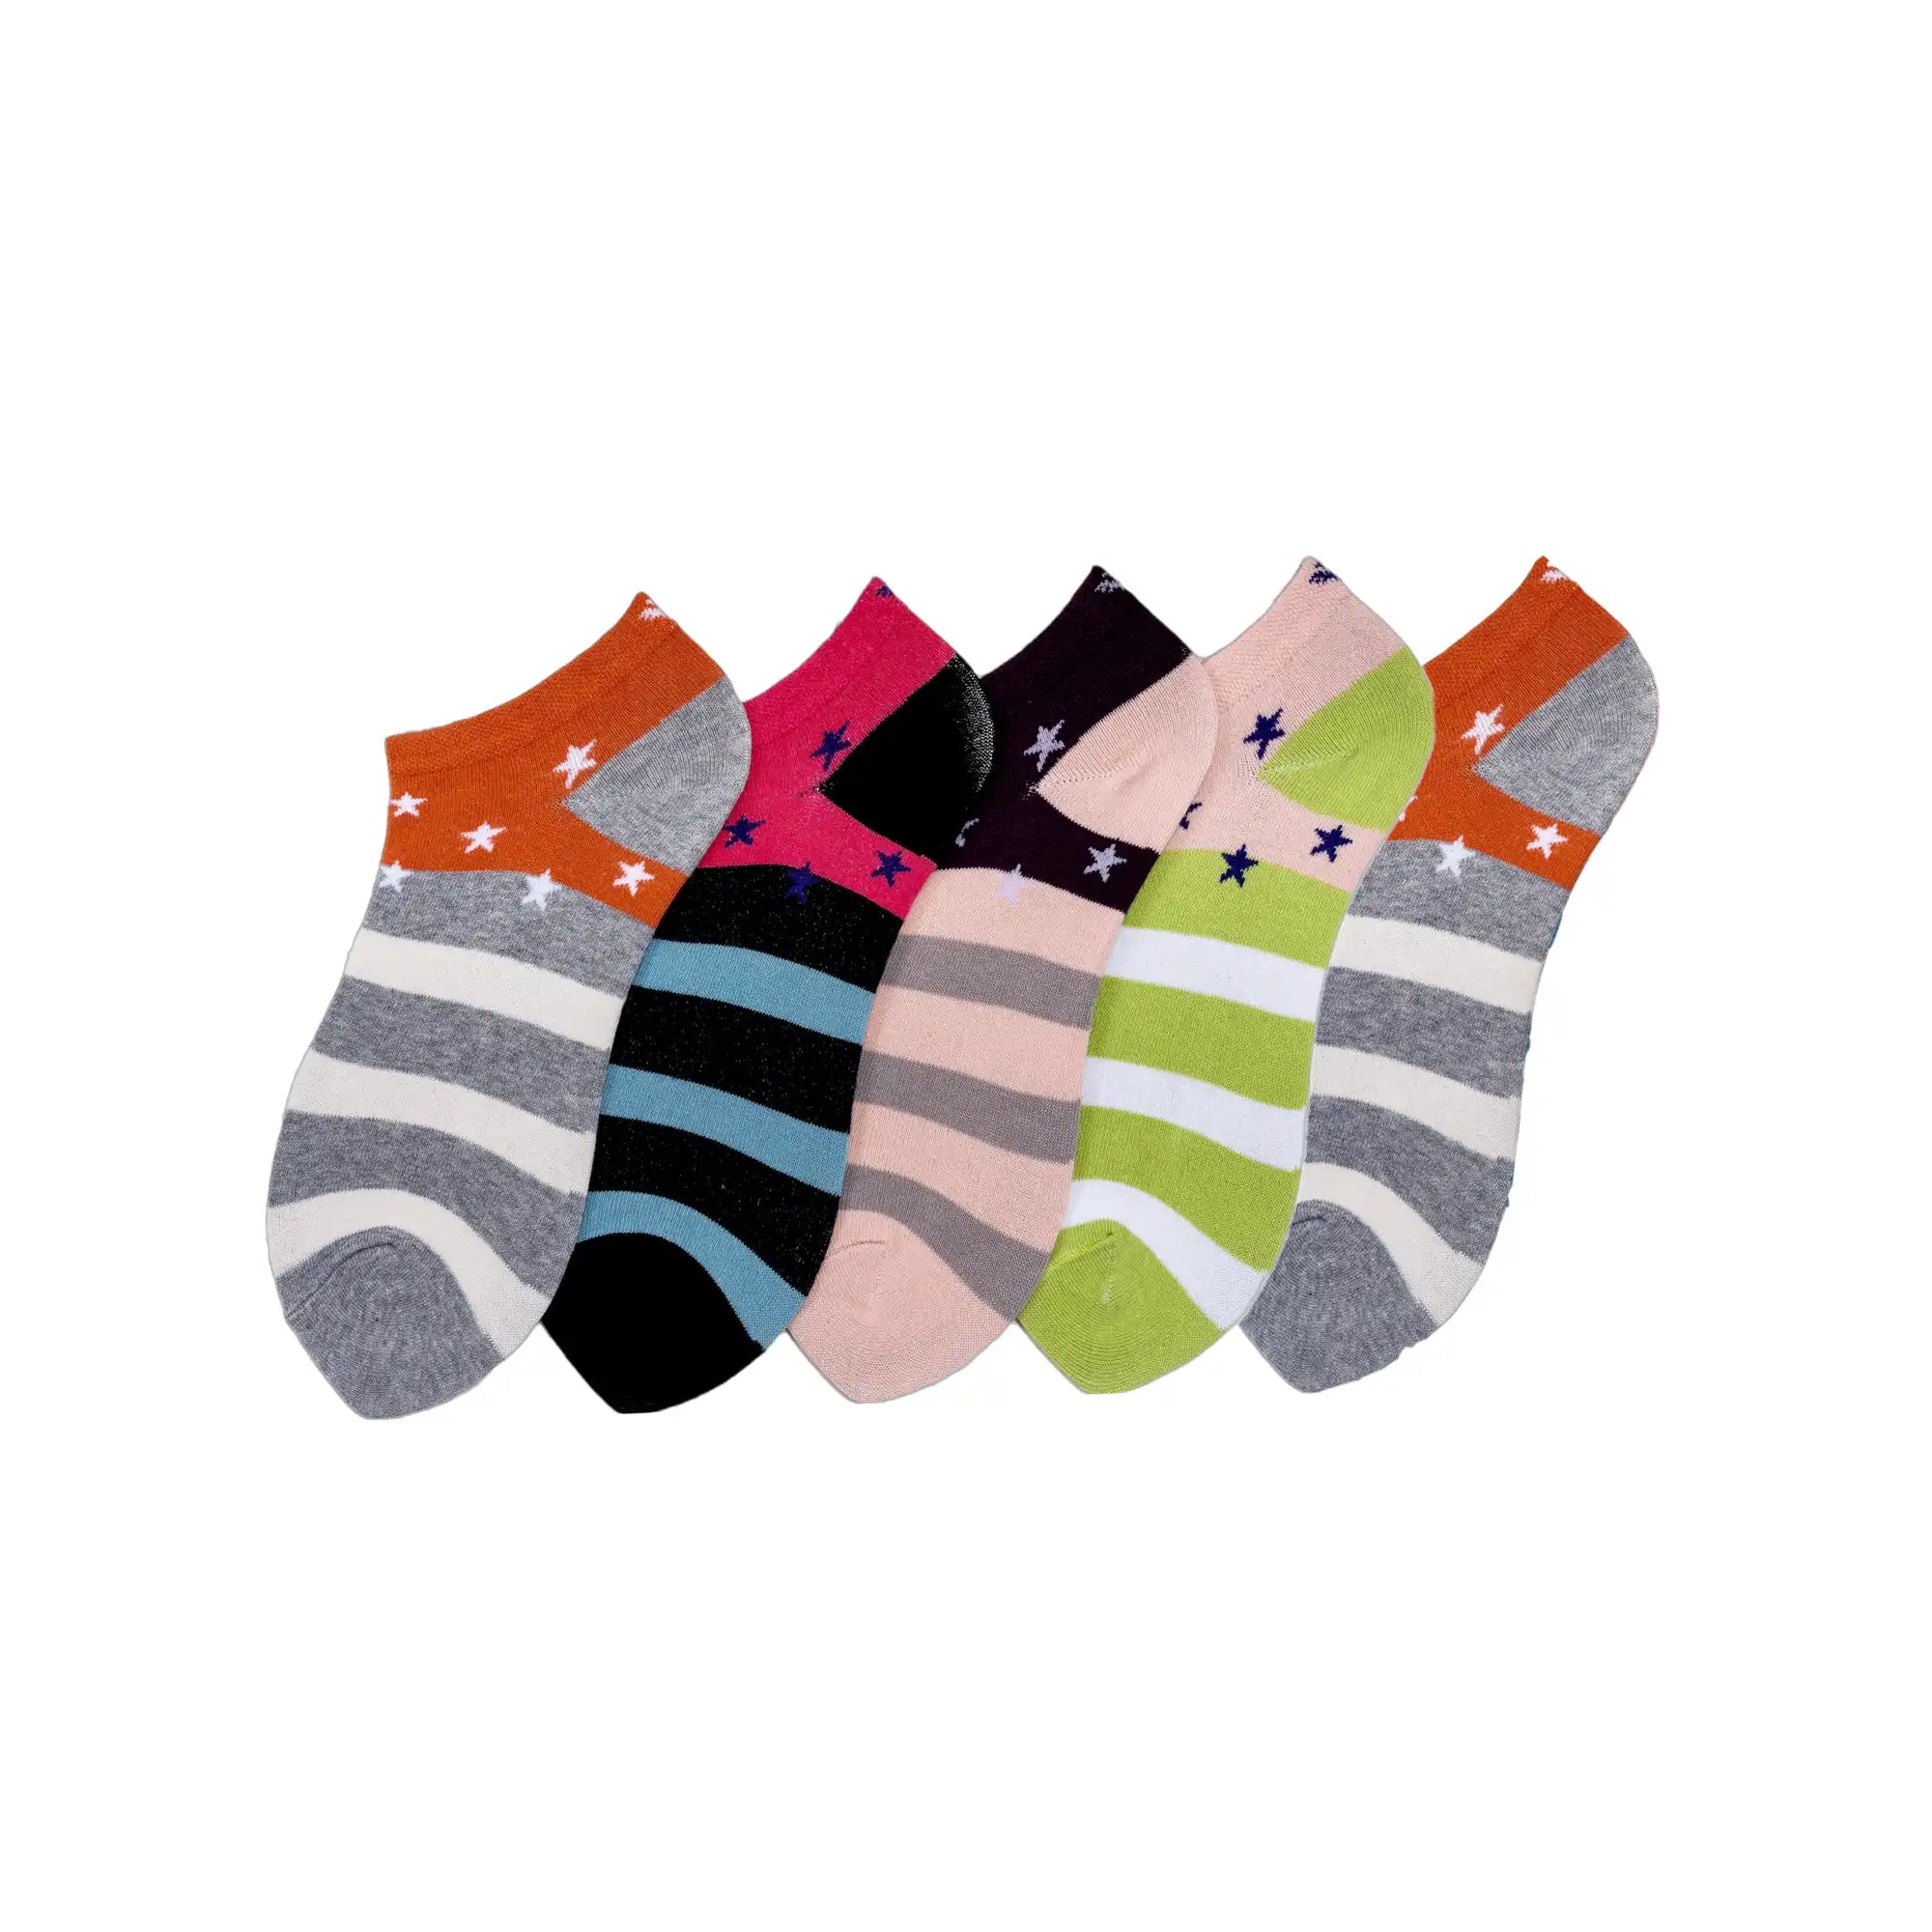 Young Wings Women's Multi Colour Cotton Fabric Design Low Ankle Length Socks - Pack of 5, Style no. 6104-W1